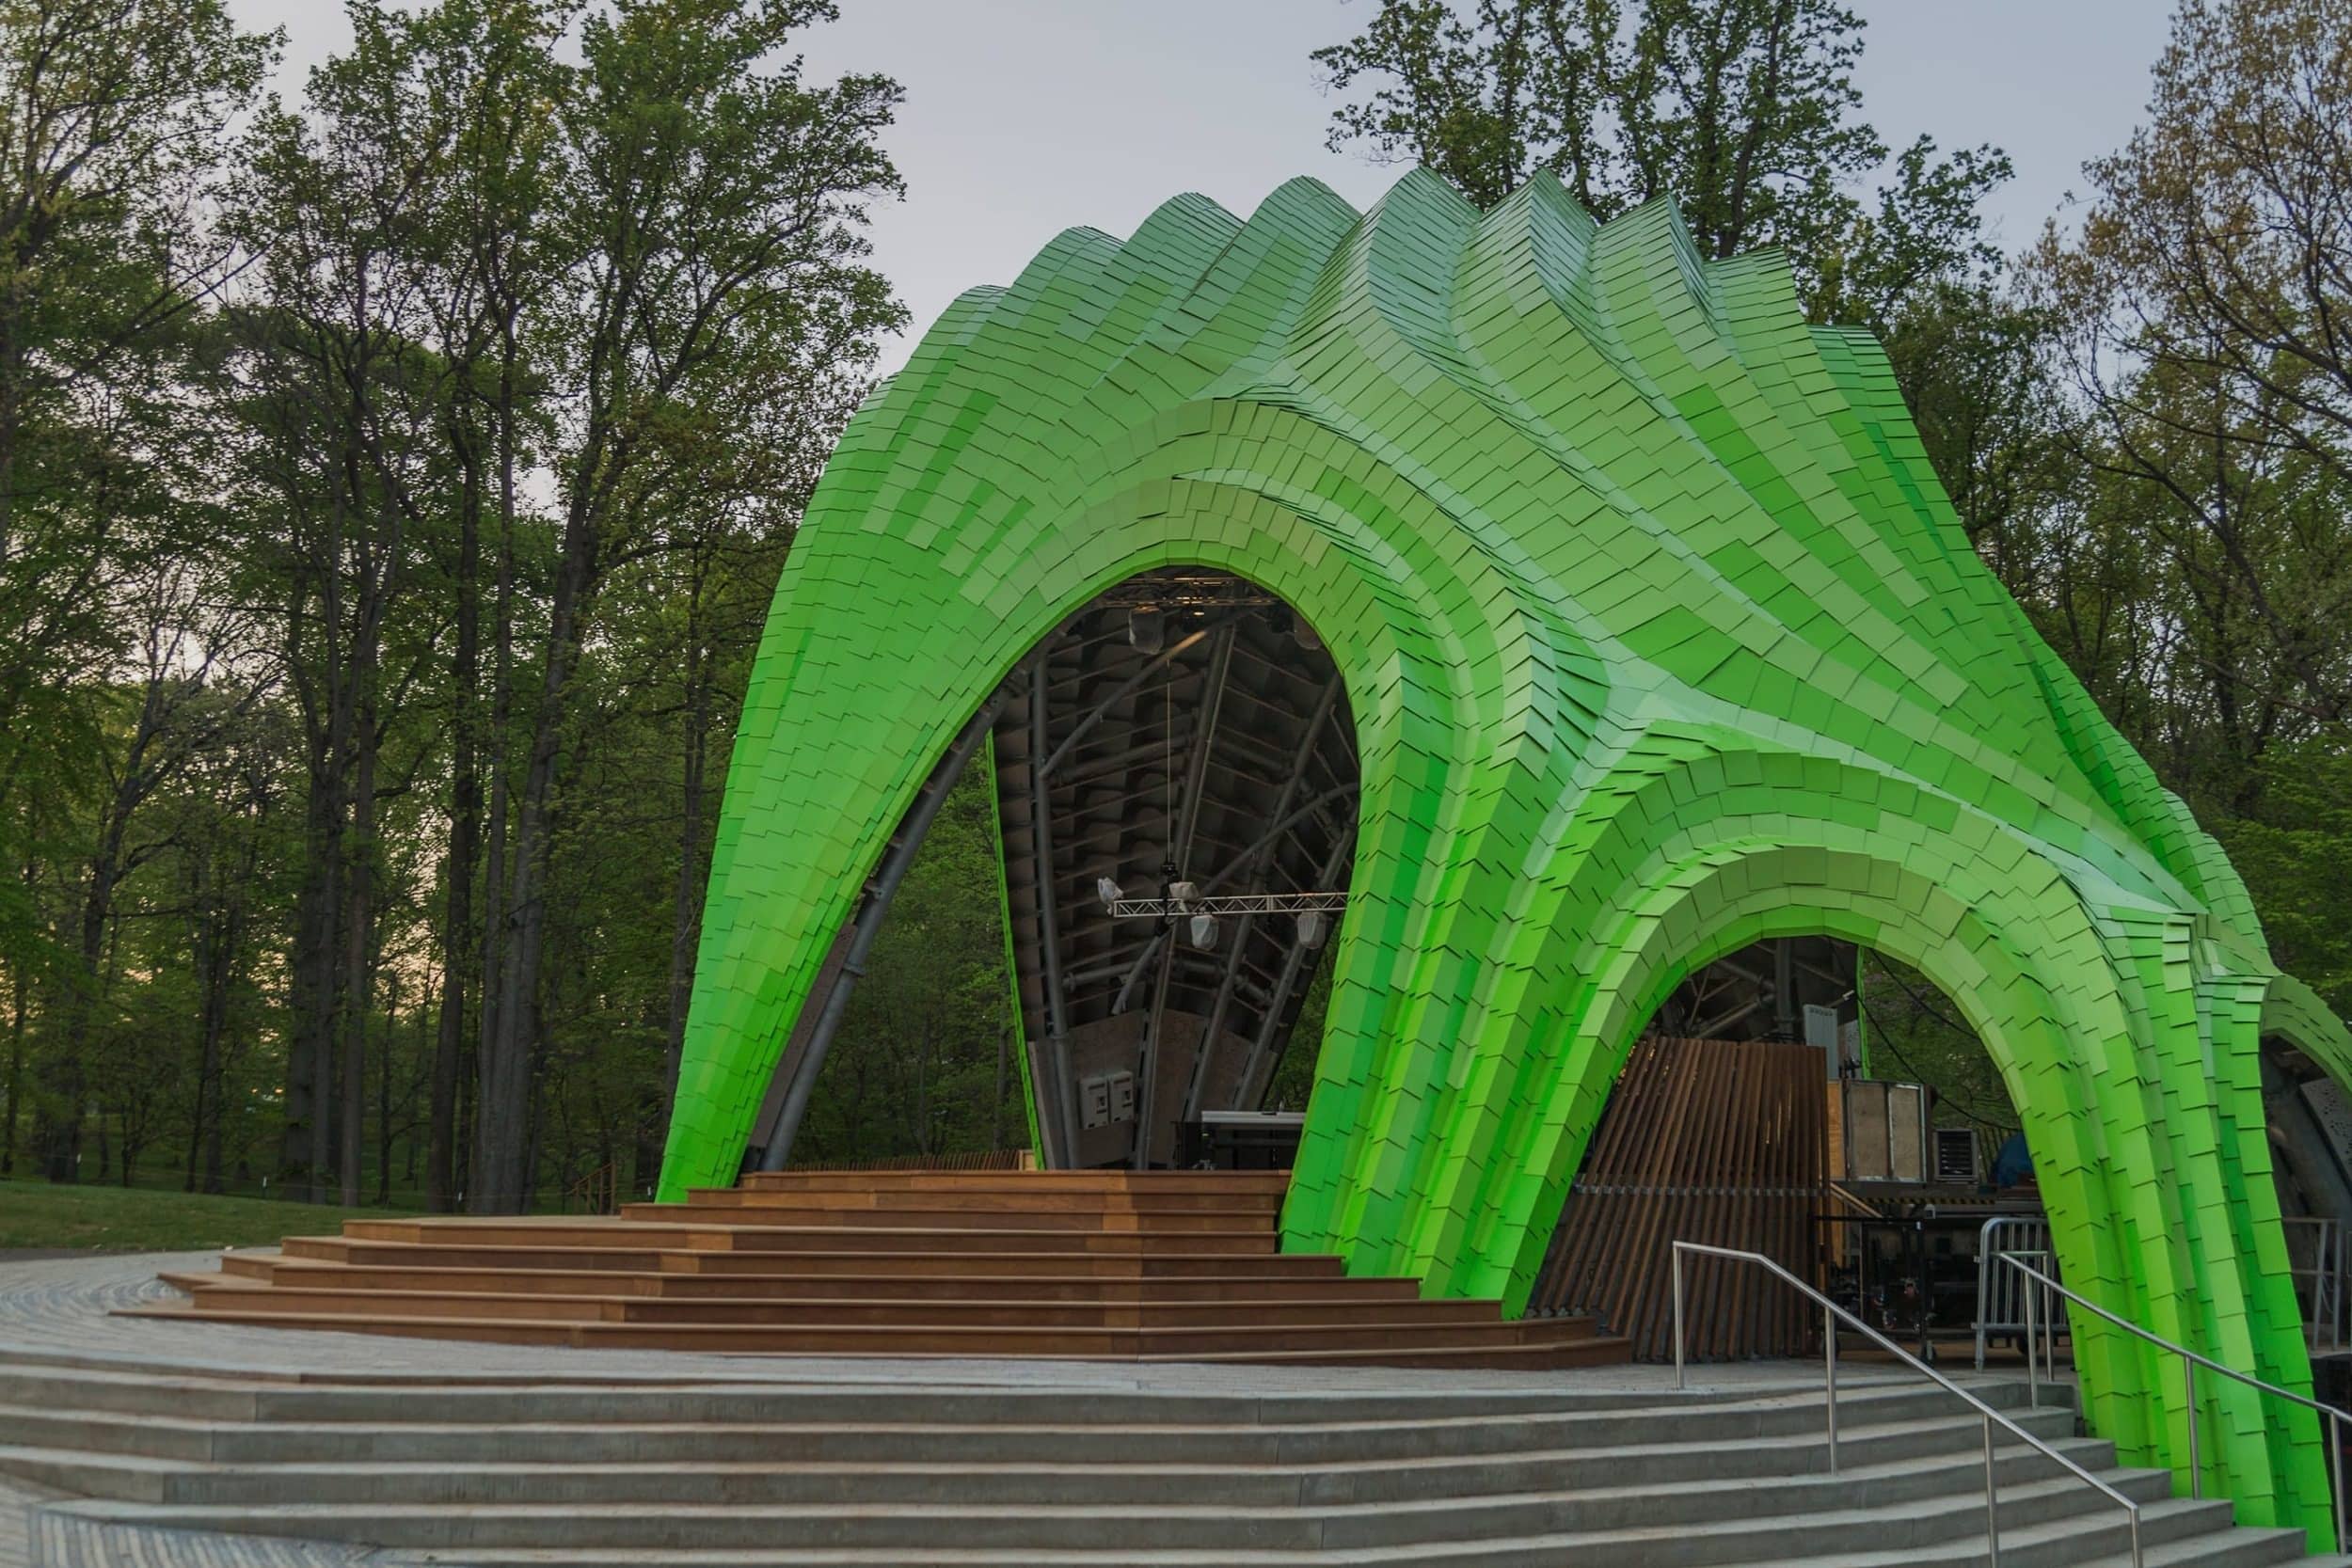 The Chrysalis Ampitheatre features an aluminum skin over a steel structure.